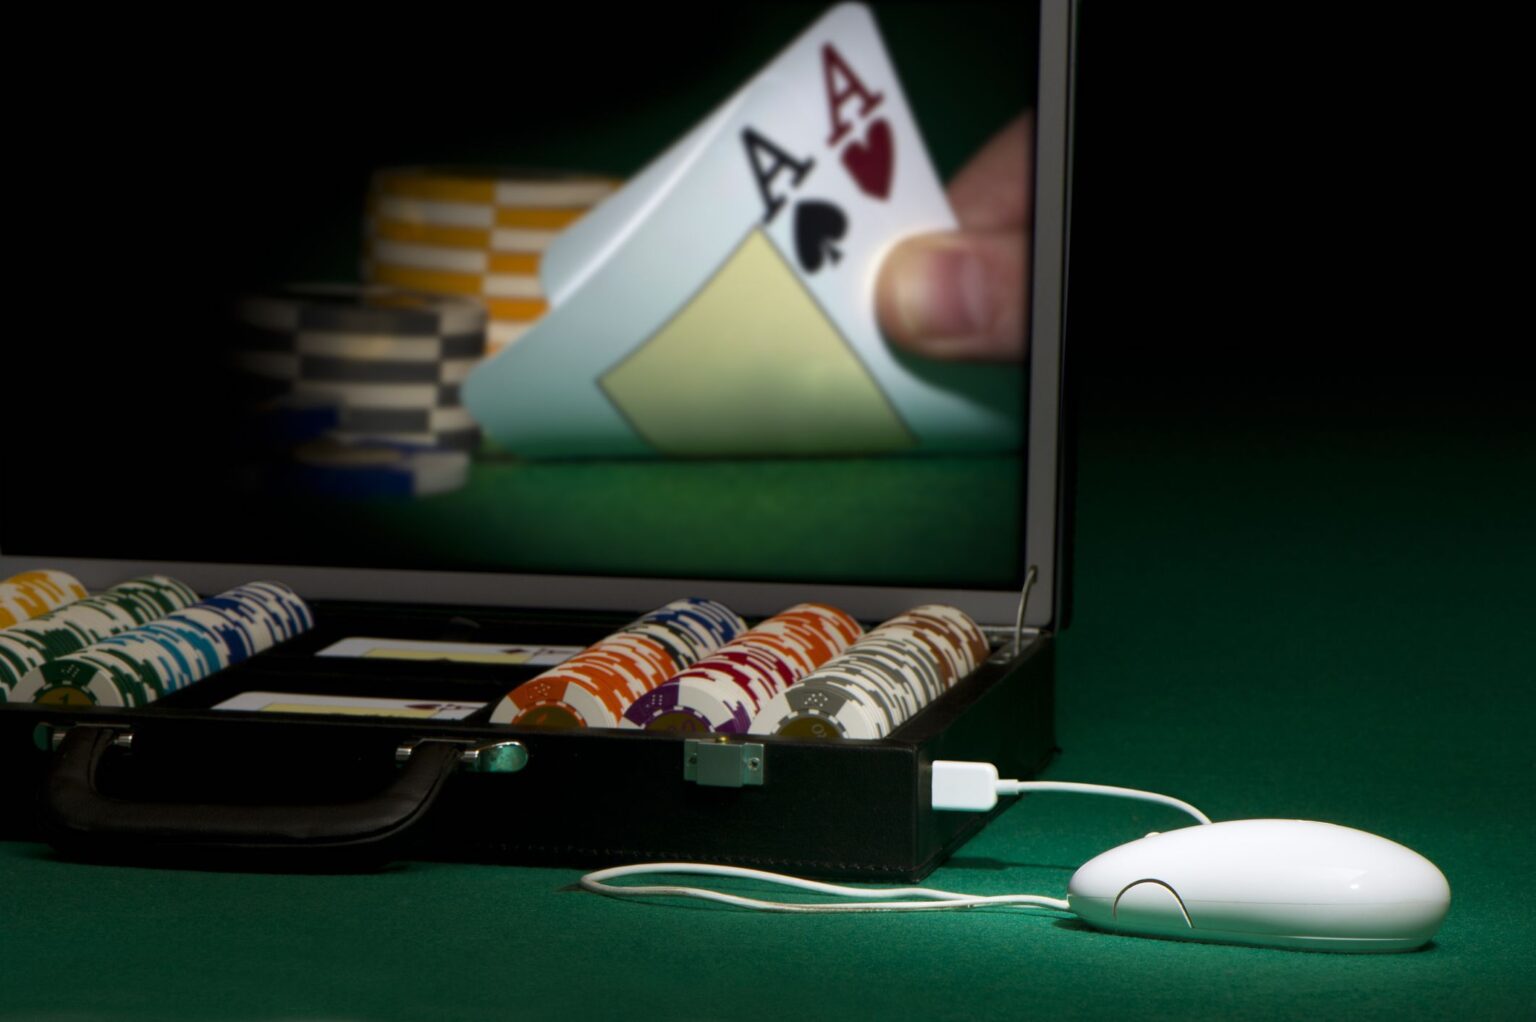 New gamblers have many online sites to choose from when they are getting started, but this magnitude is not always good. You can easily get confused.